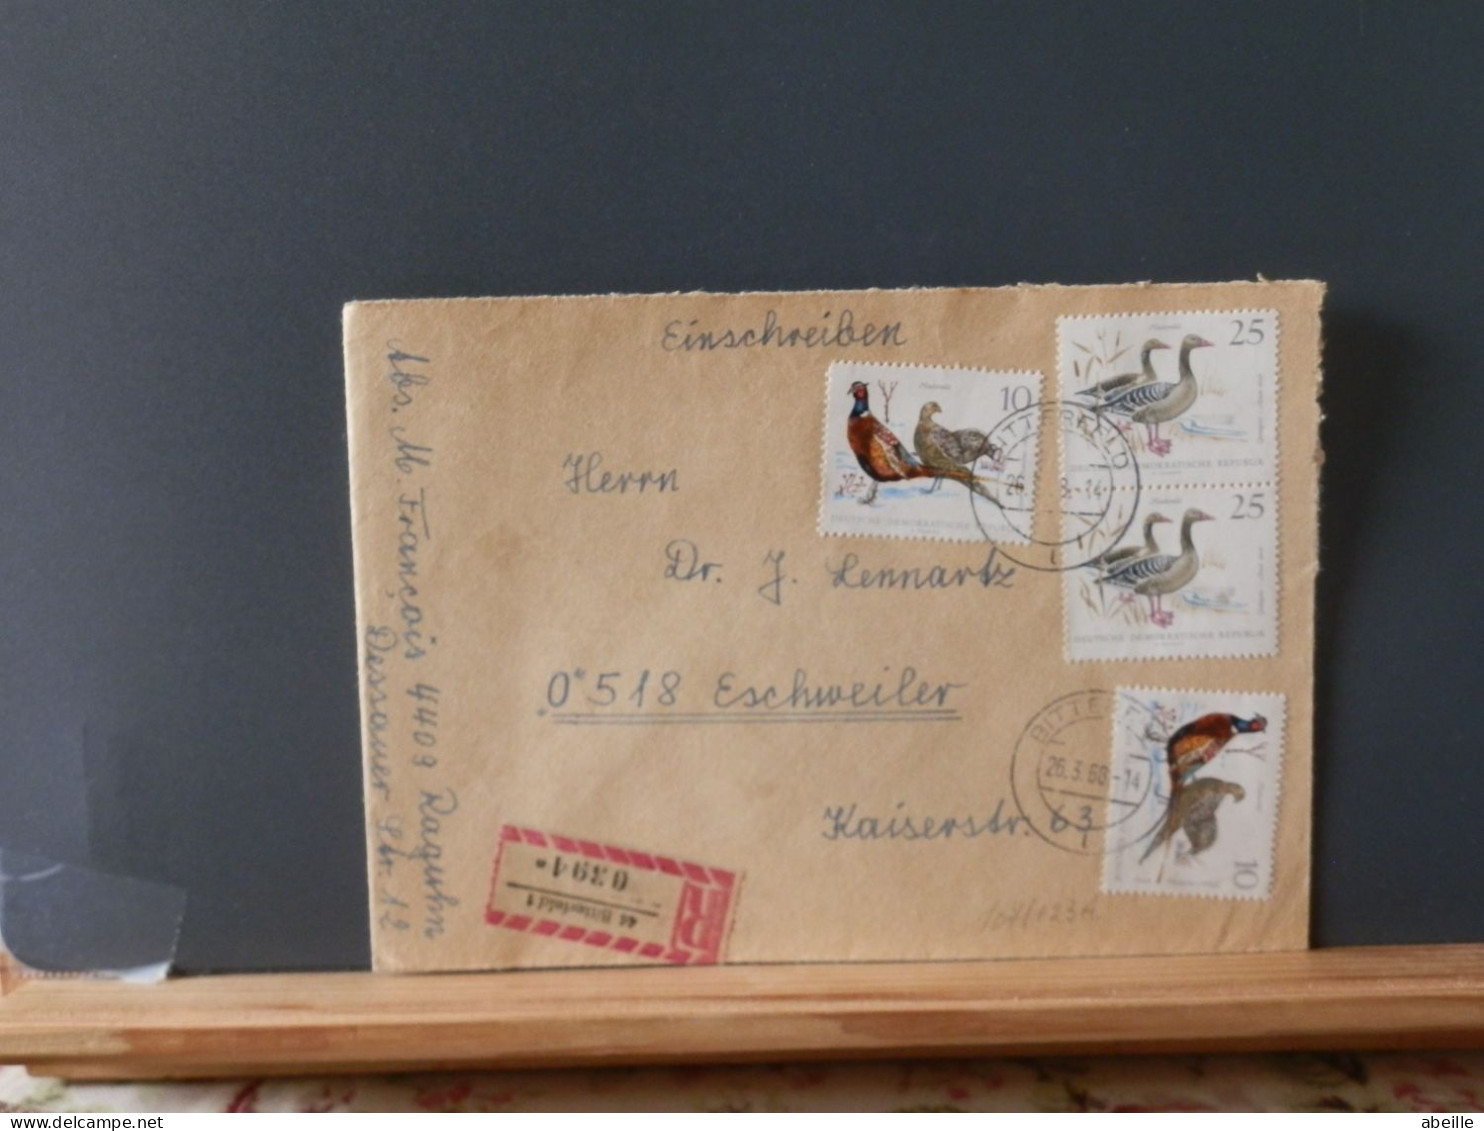 107/023A  LETTRE  DDR - Galline & Gallinaceo